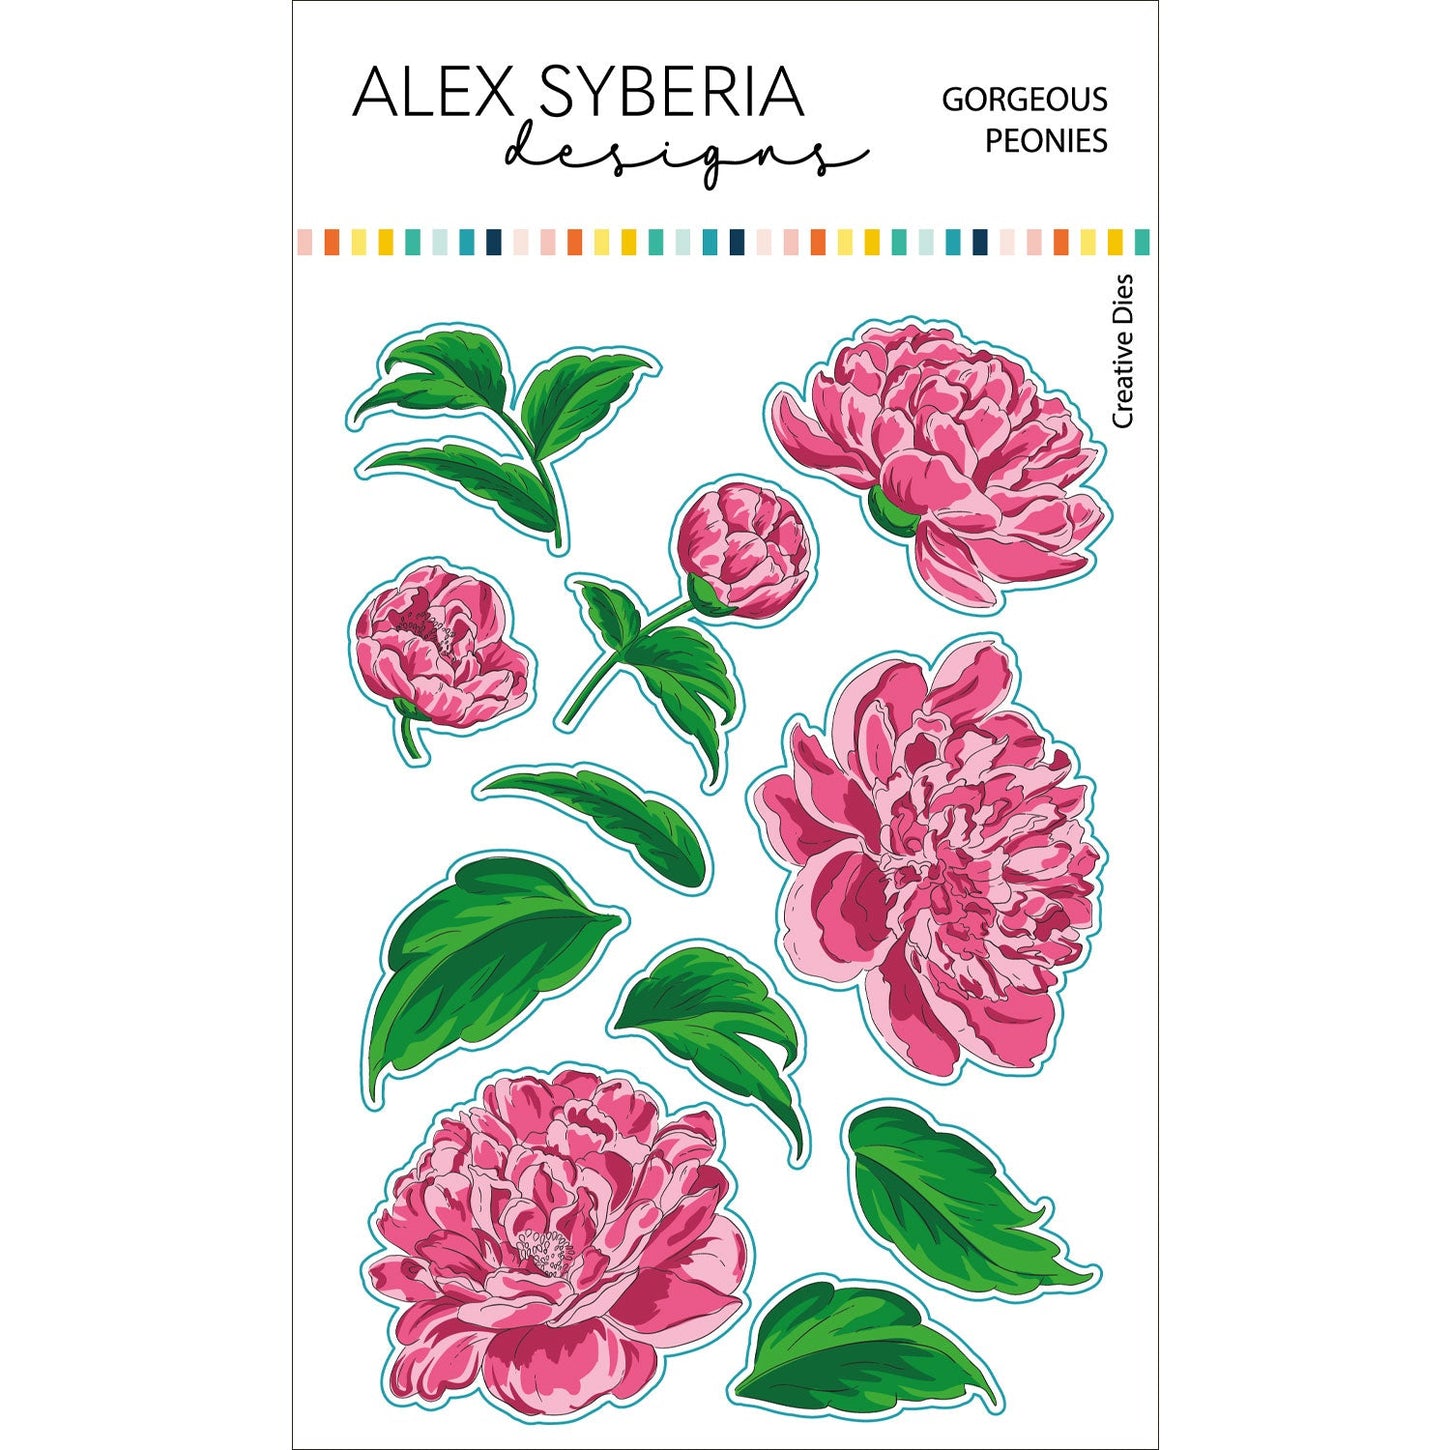 Gorgeous-Peonies-Stamp-alex-syberia-designs-layering-stencil-die-hot-foil-plate-cardmaking-tutorial-simon-says-stamp